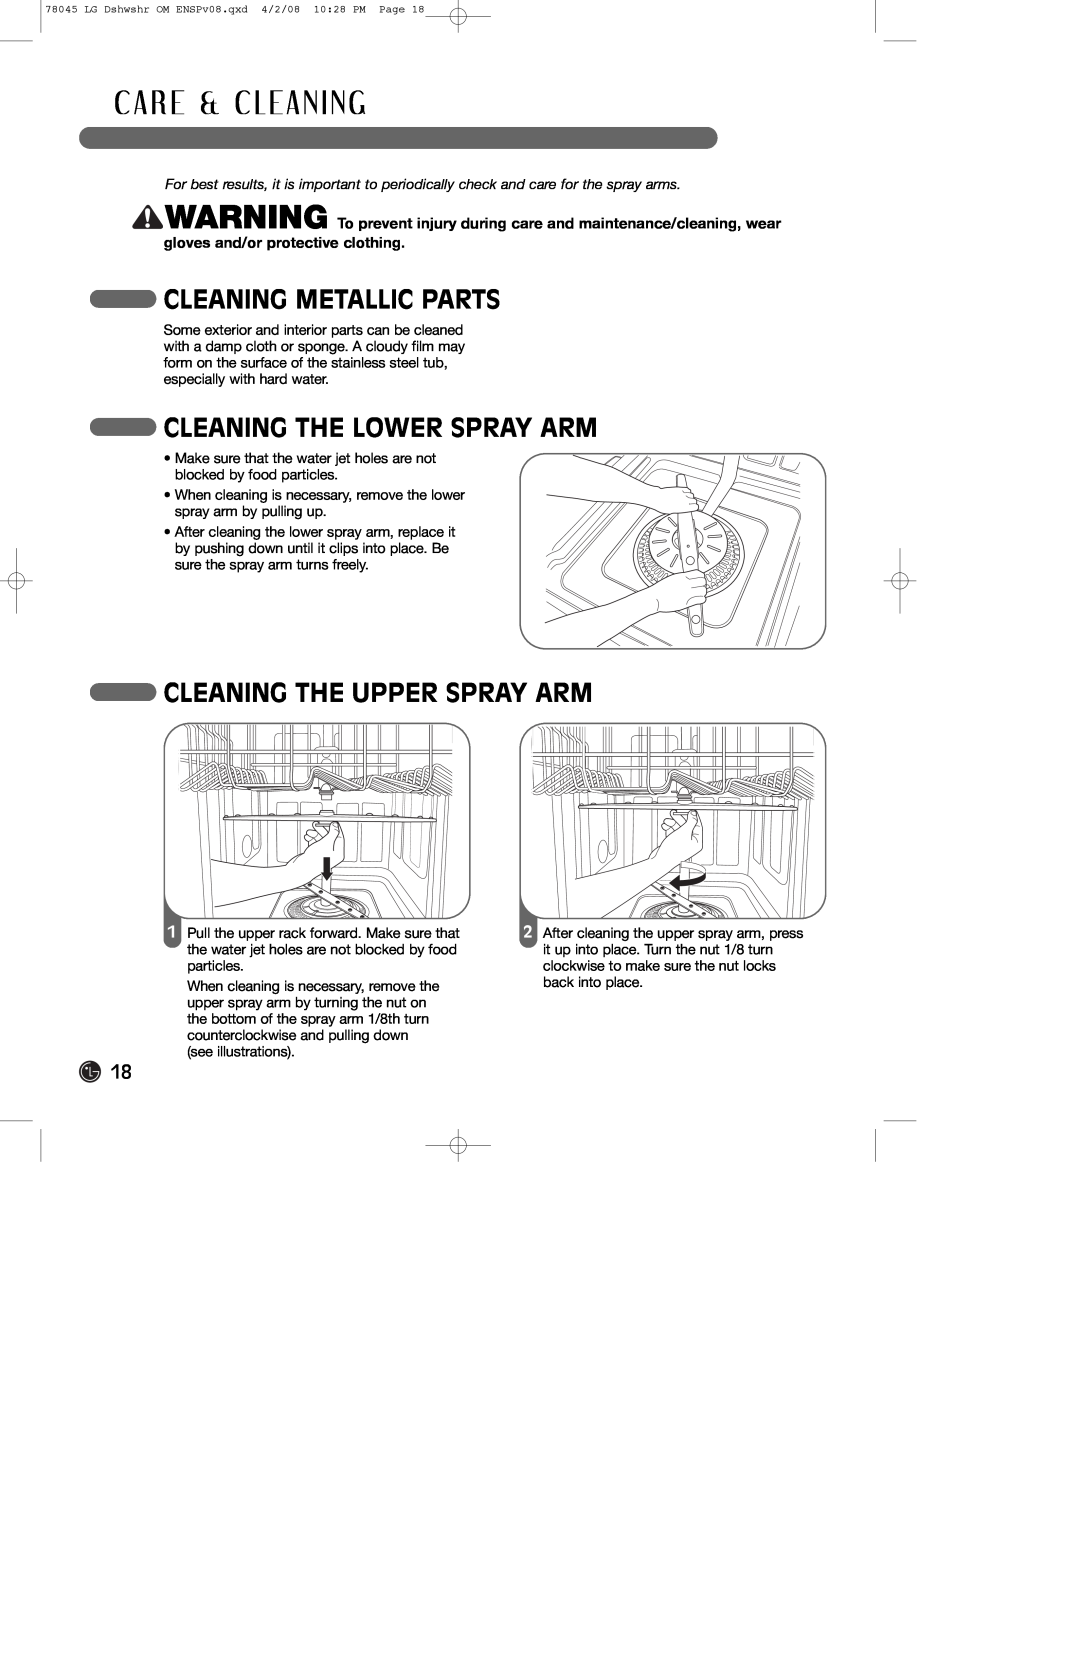 LG Electronics LDF6920WW, LDF6920BB C A R E & C L E A N I N G, Cleaning Metallic Parts, Cleaning The Lower Spray Arm 